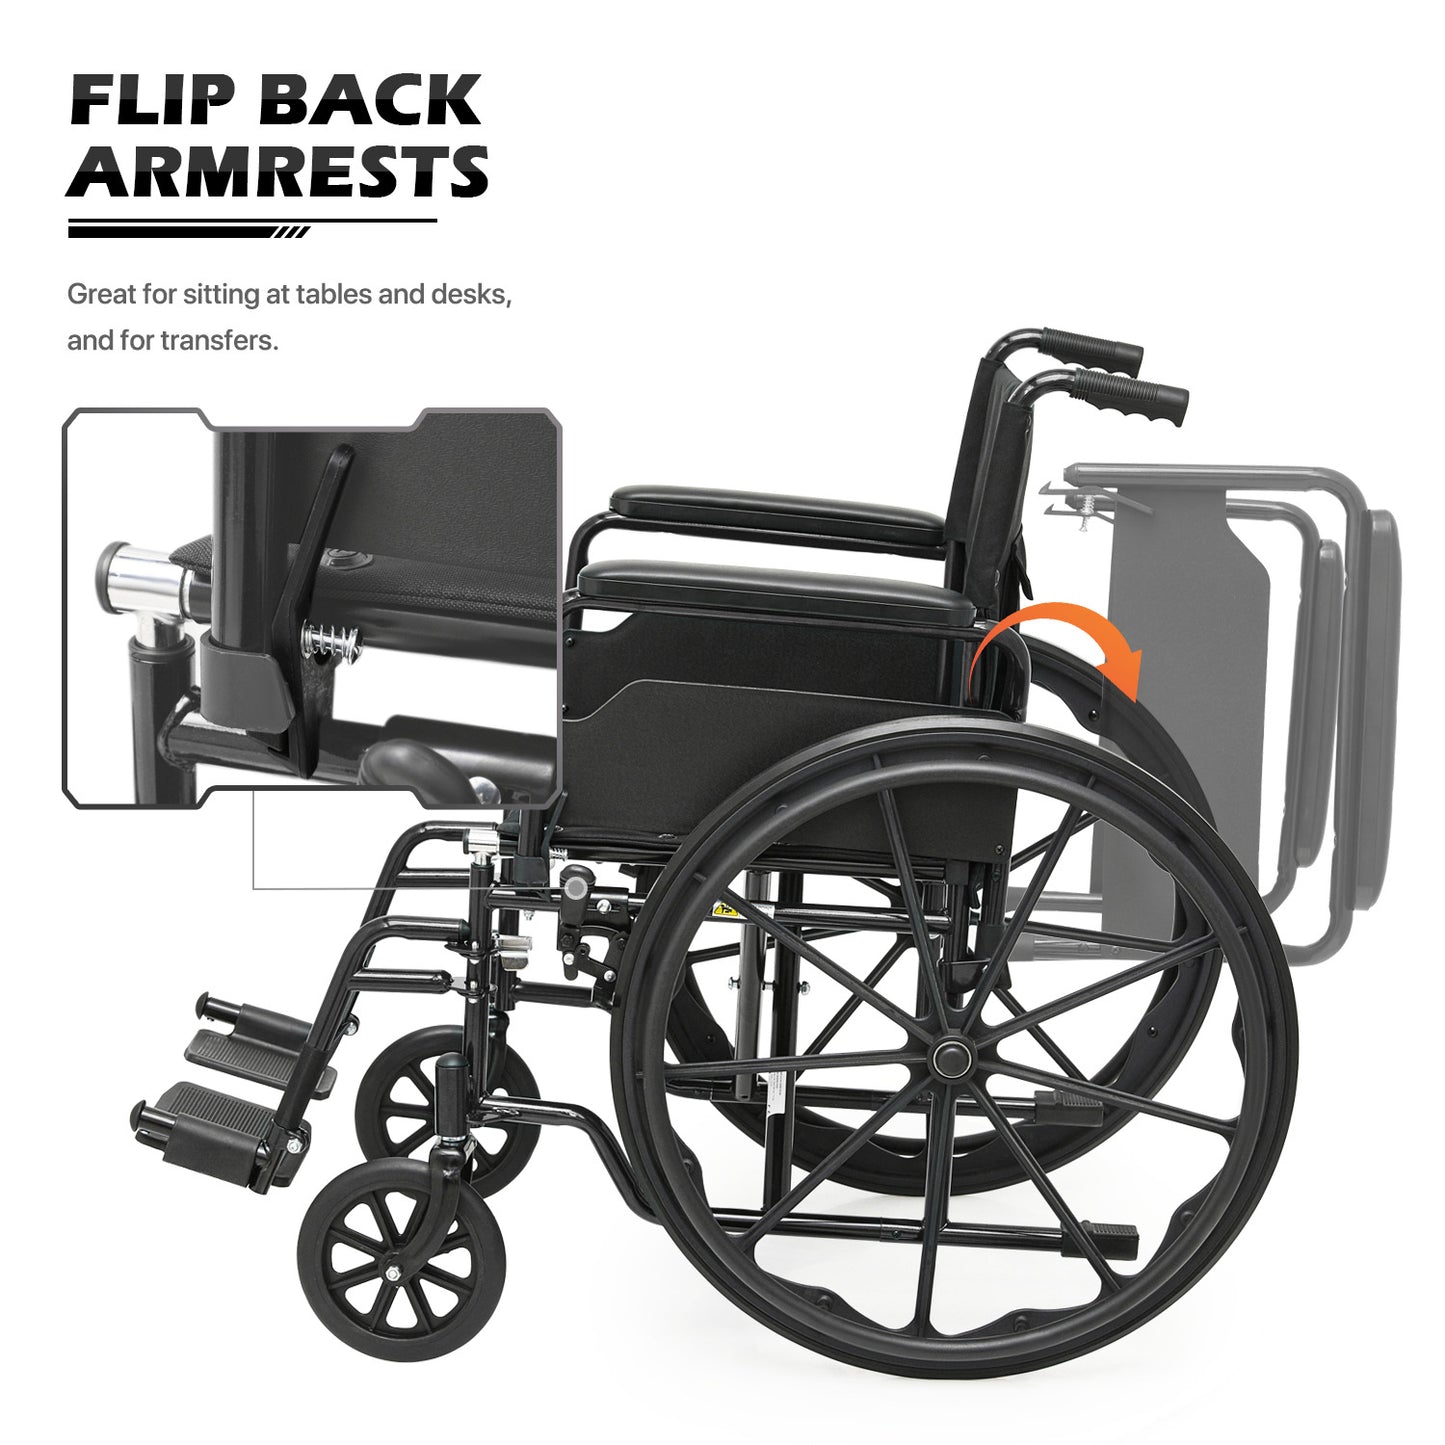 Manual Wheelchair -  Black, FDA Approved - 18"x16" Seat